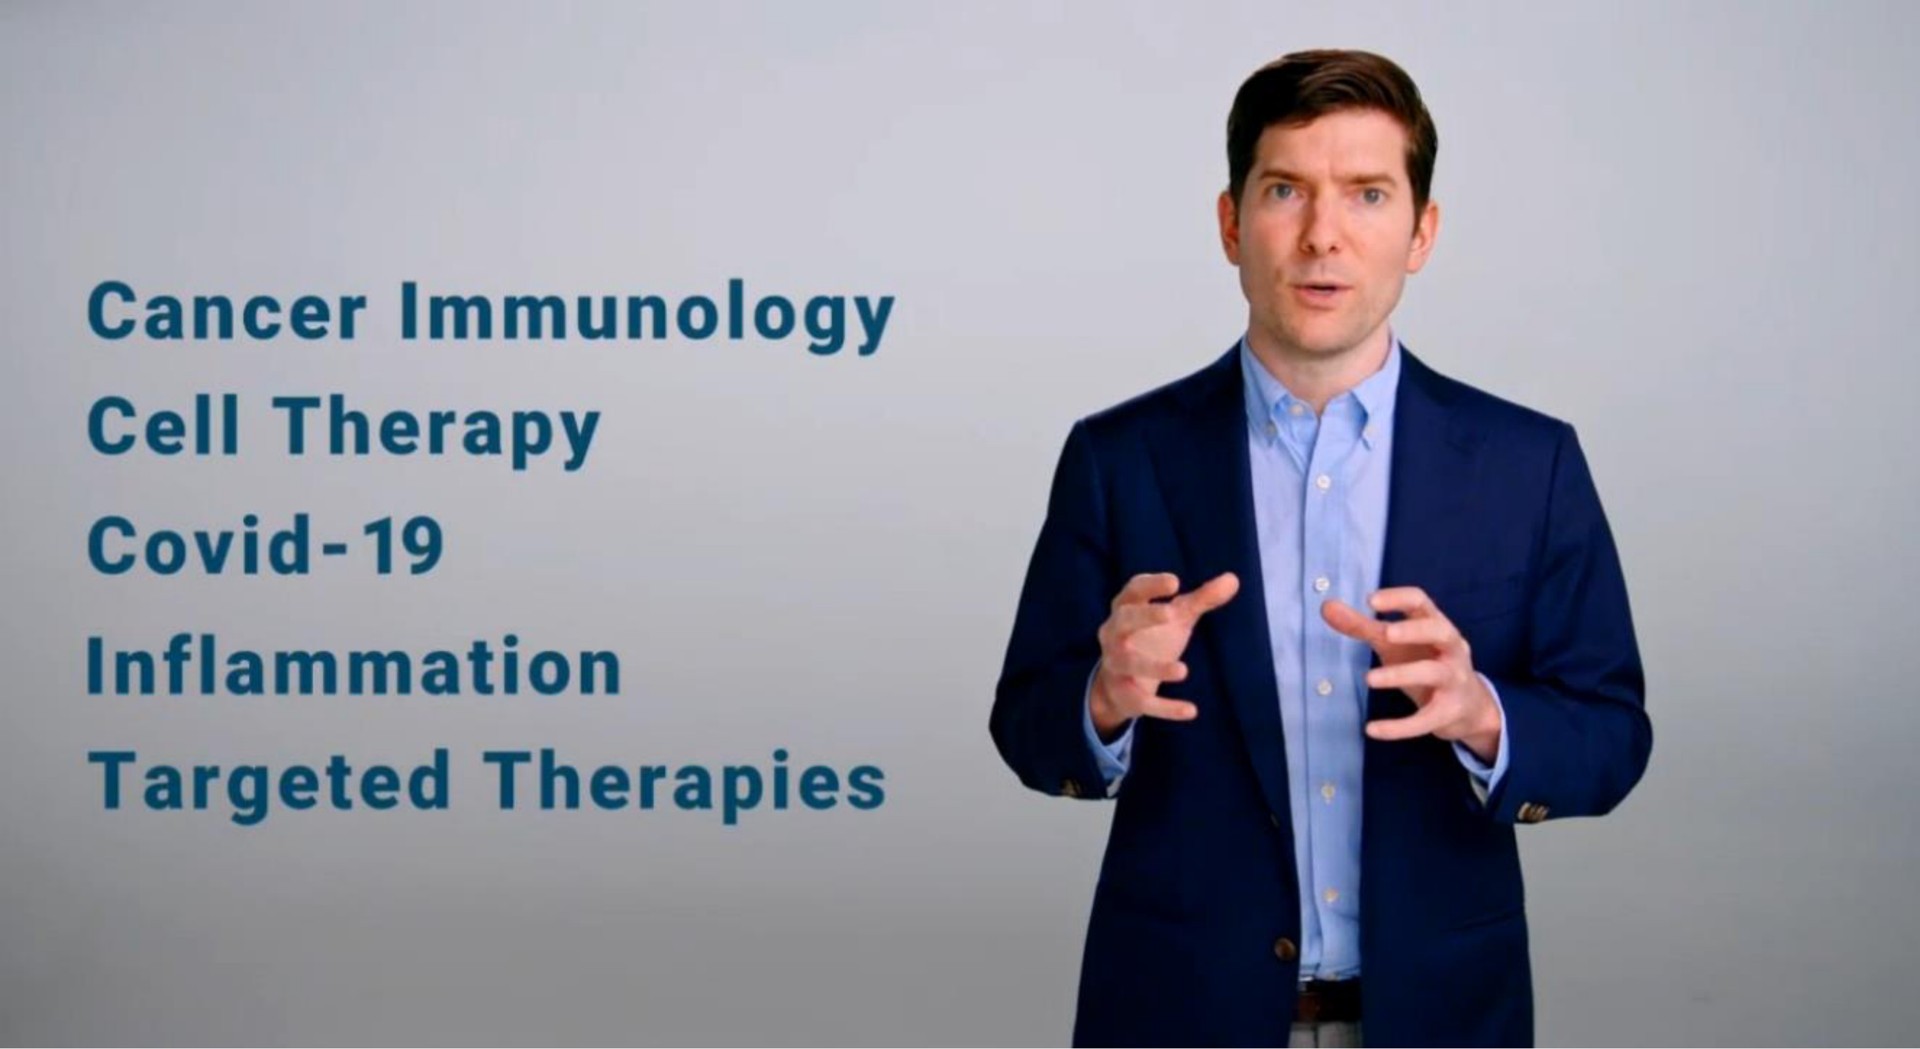 cancer immunology cell therapy covid inflammation targeted therapies | Isoplexis